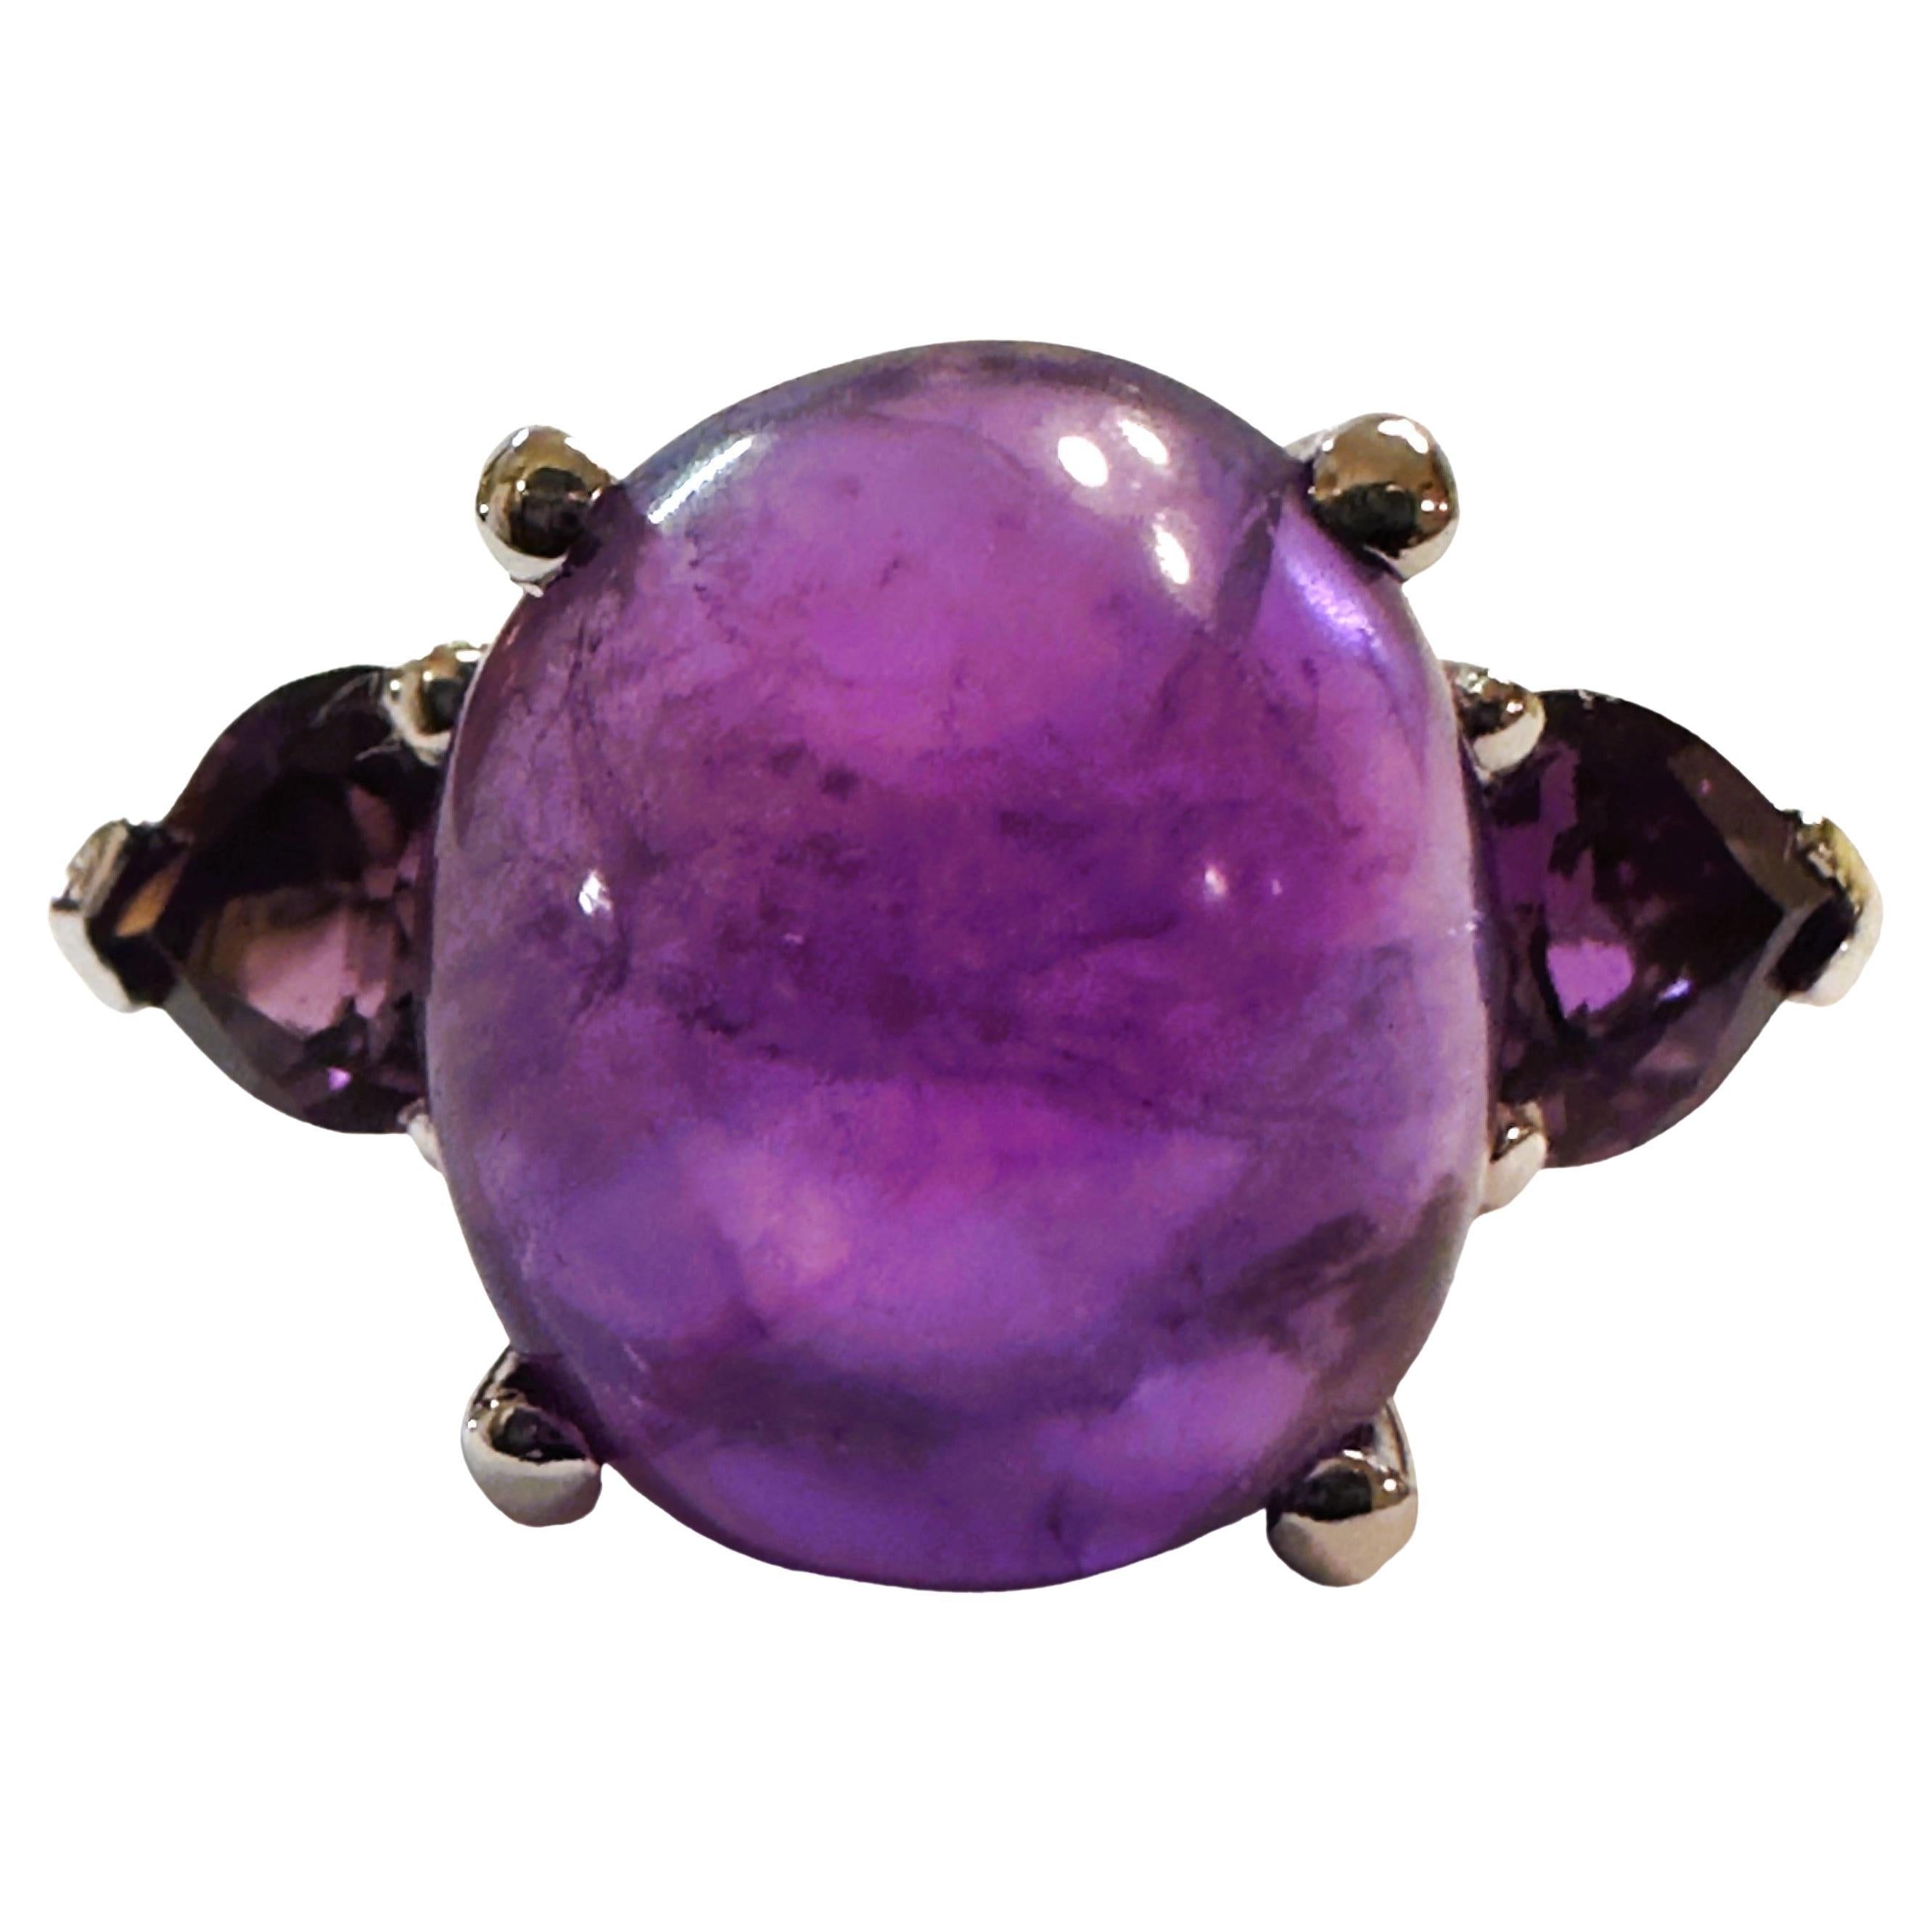 New Brazilian 7.3 Ct Cabochon & Trillion Cut Amethyst Sterling Ring Size 7 For Sale